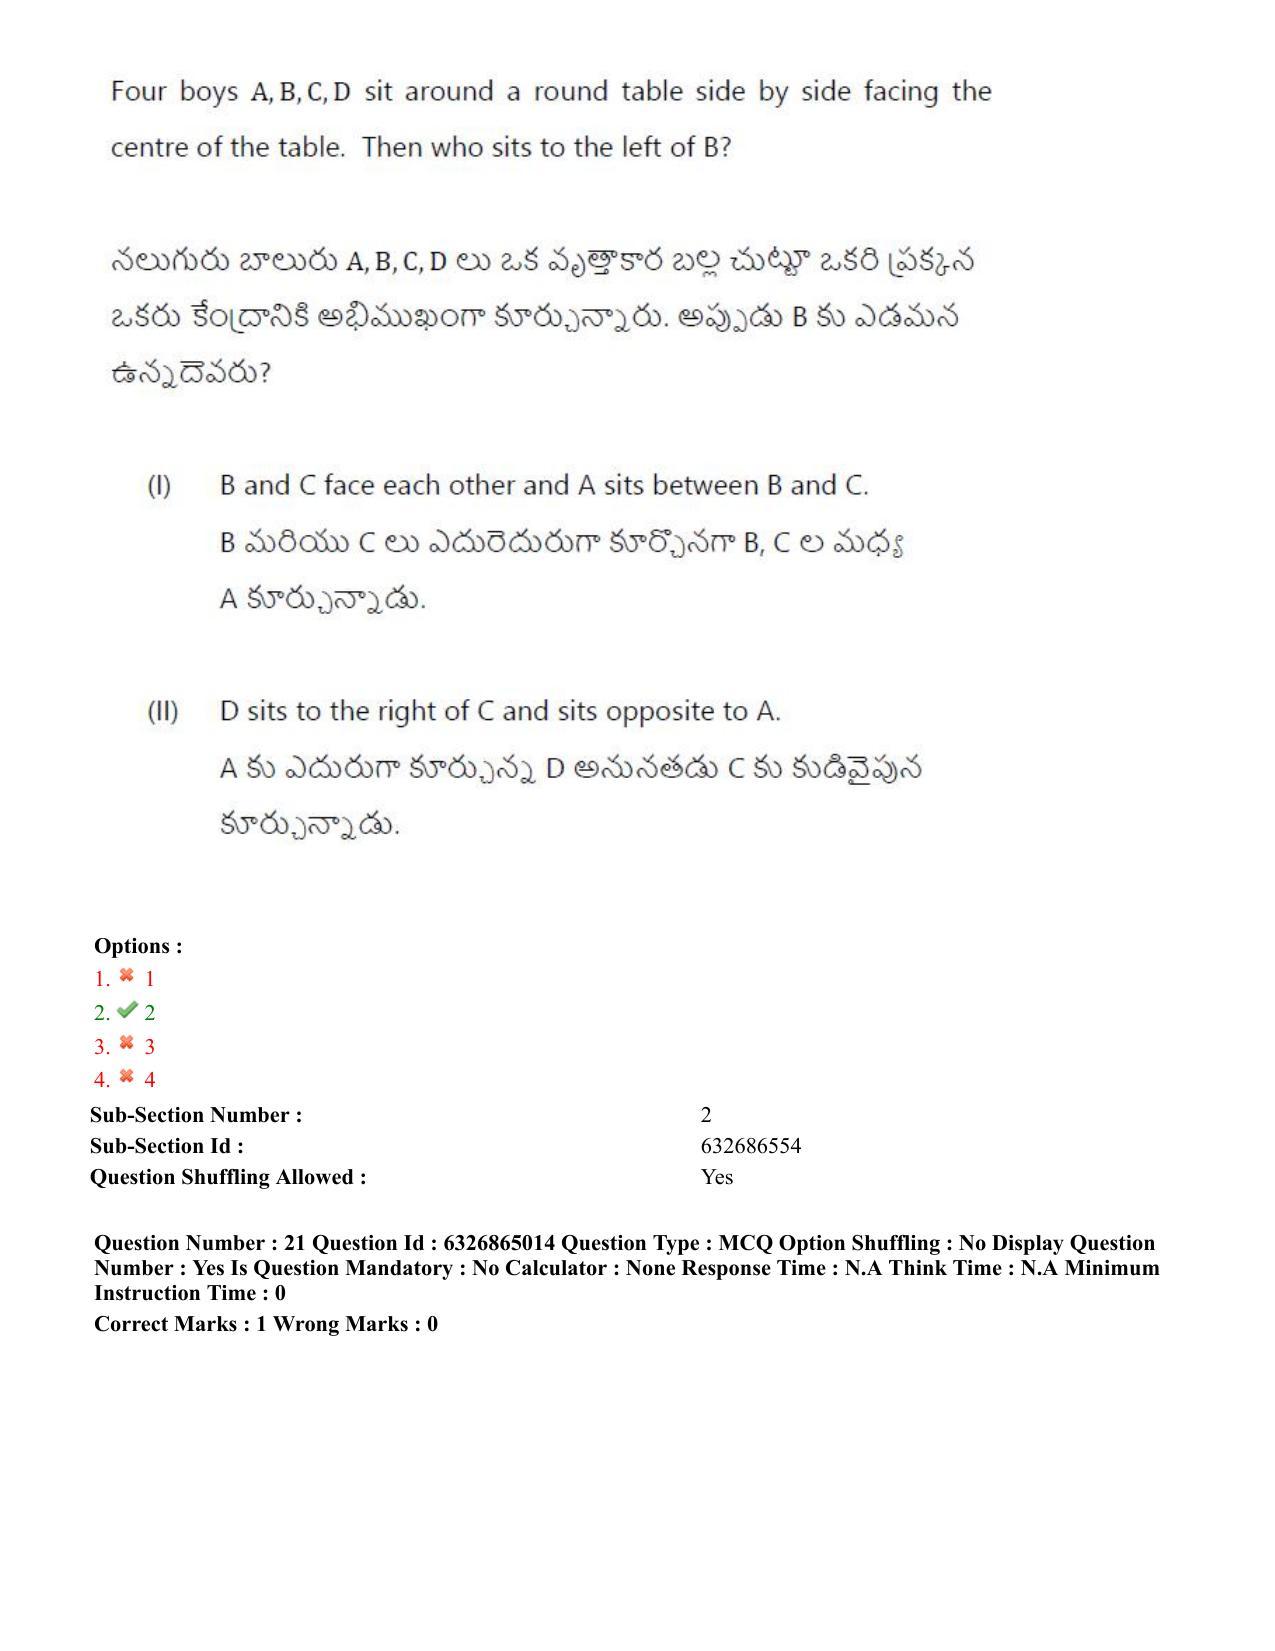 TS ICET 2022 Question Paper 2 - Jul 28, 2022	 - Page 19